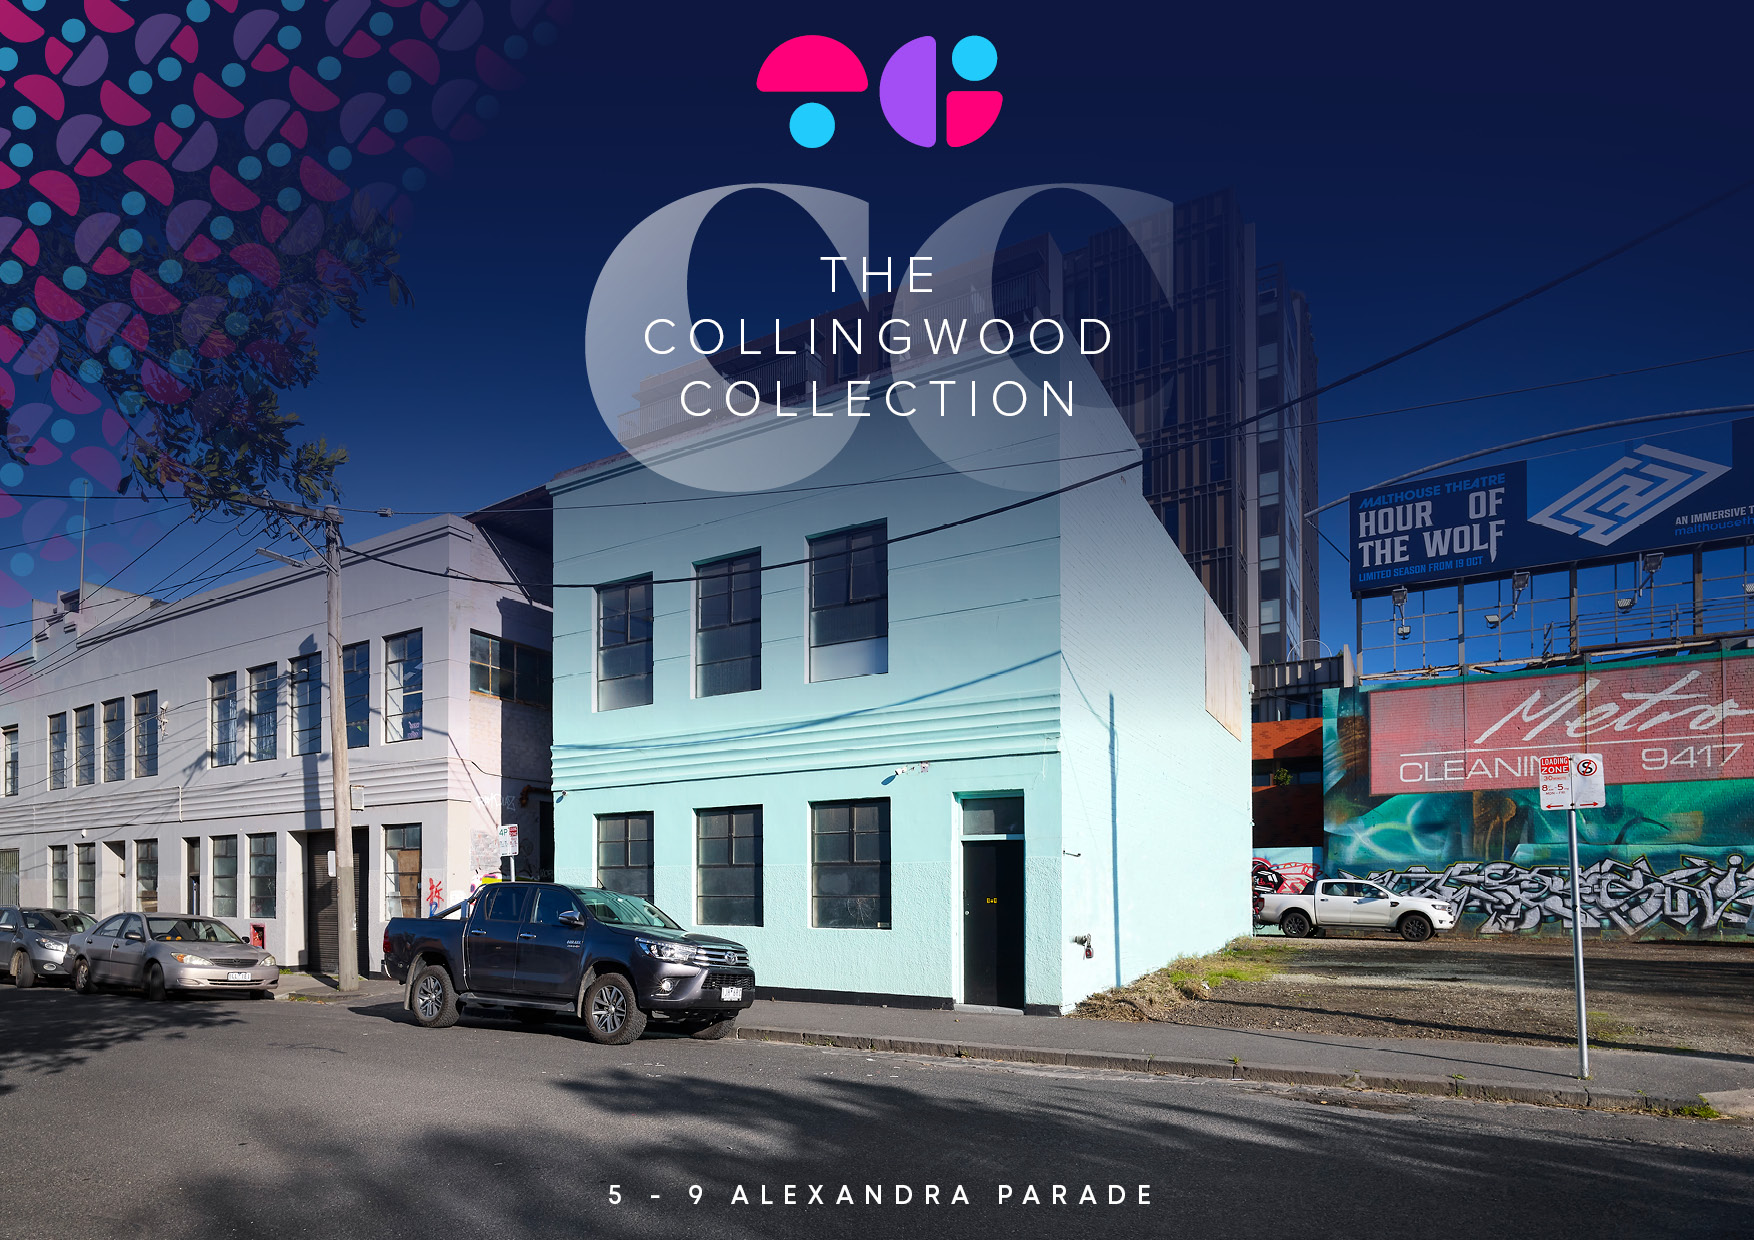 The Collingwood Collection TCI Lease Leased 55 Emma Street 5-9 Alexandra Parade 456 & 458 Smith Street